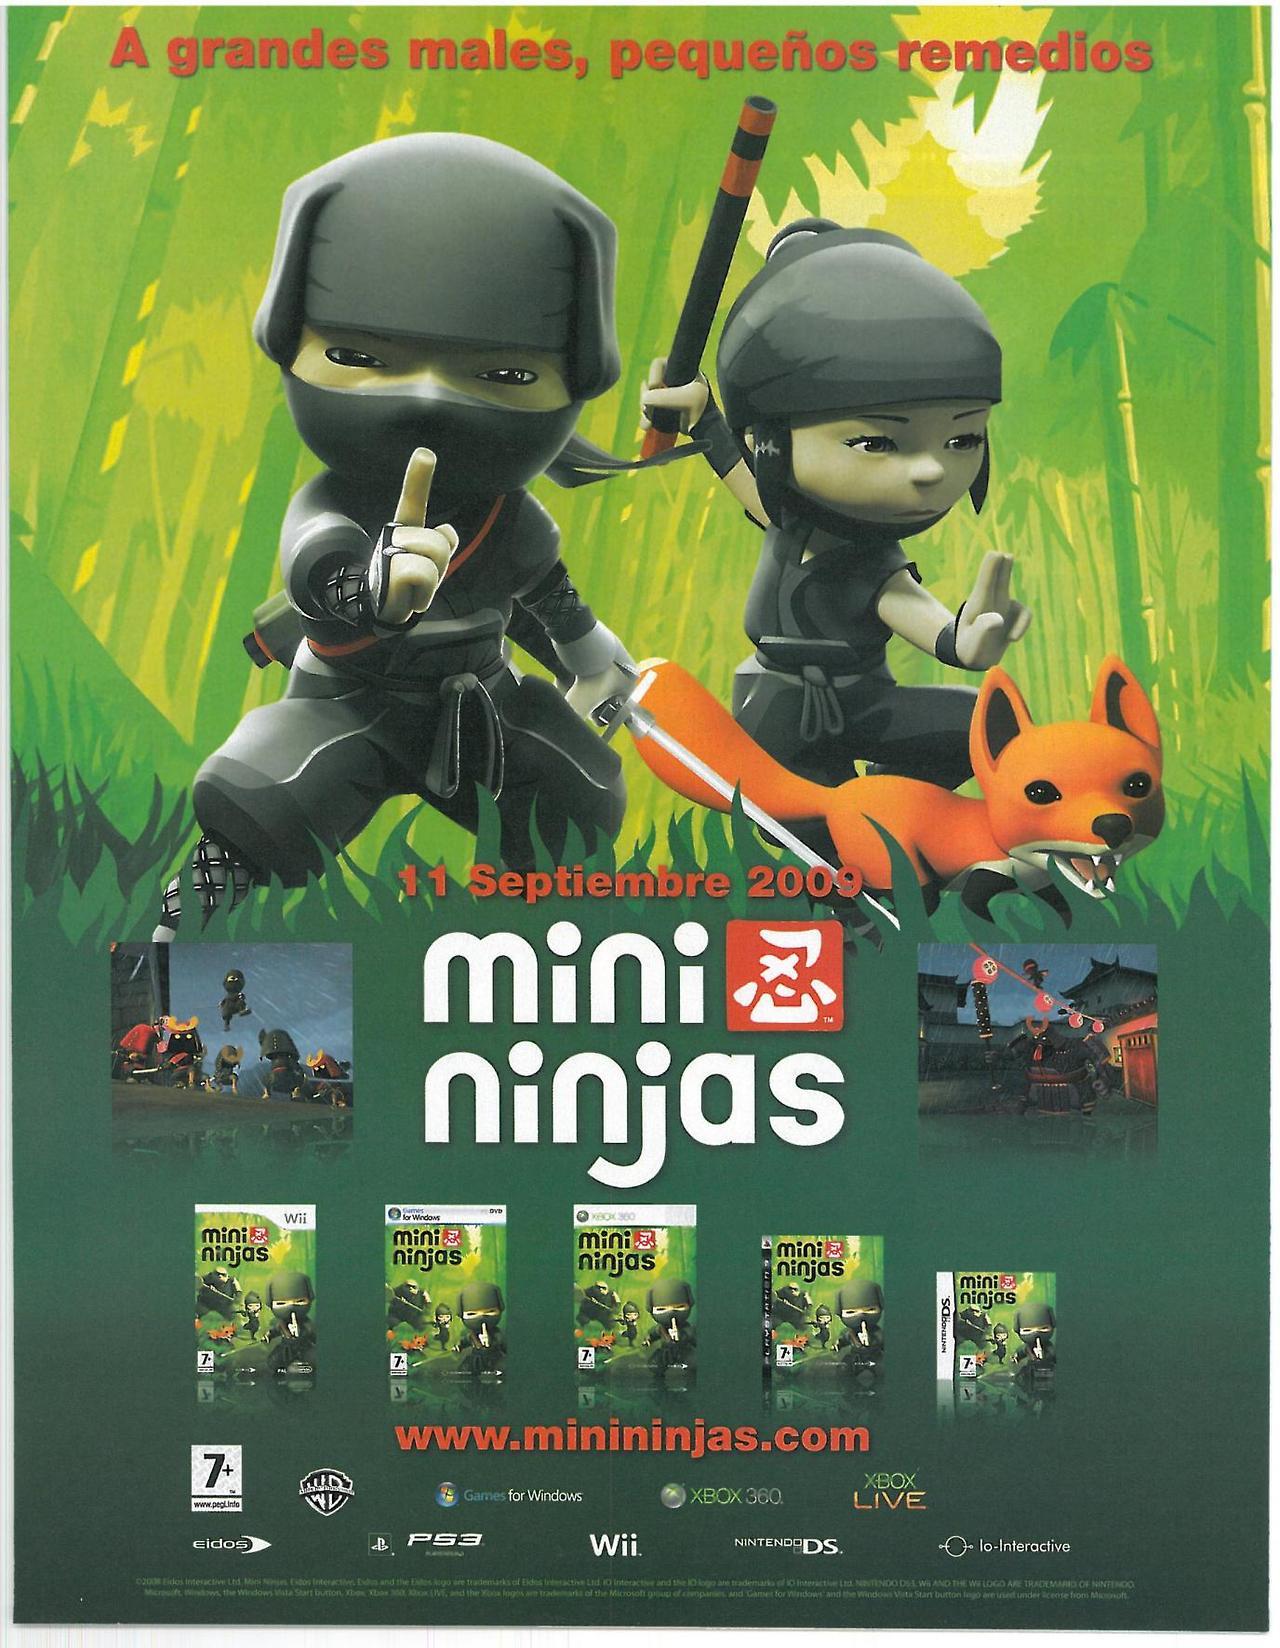 ‘Mini Ninjas’[WII / PC / X360 / PS3 / DS]
[SPAIN] [MAGAZINE] [2009]
• Nintendo Acción , October 2009 (#203)
• Scanned/Uploaded by Sketch the Cow, via The Internet Archive